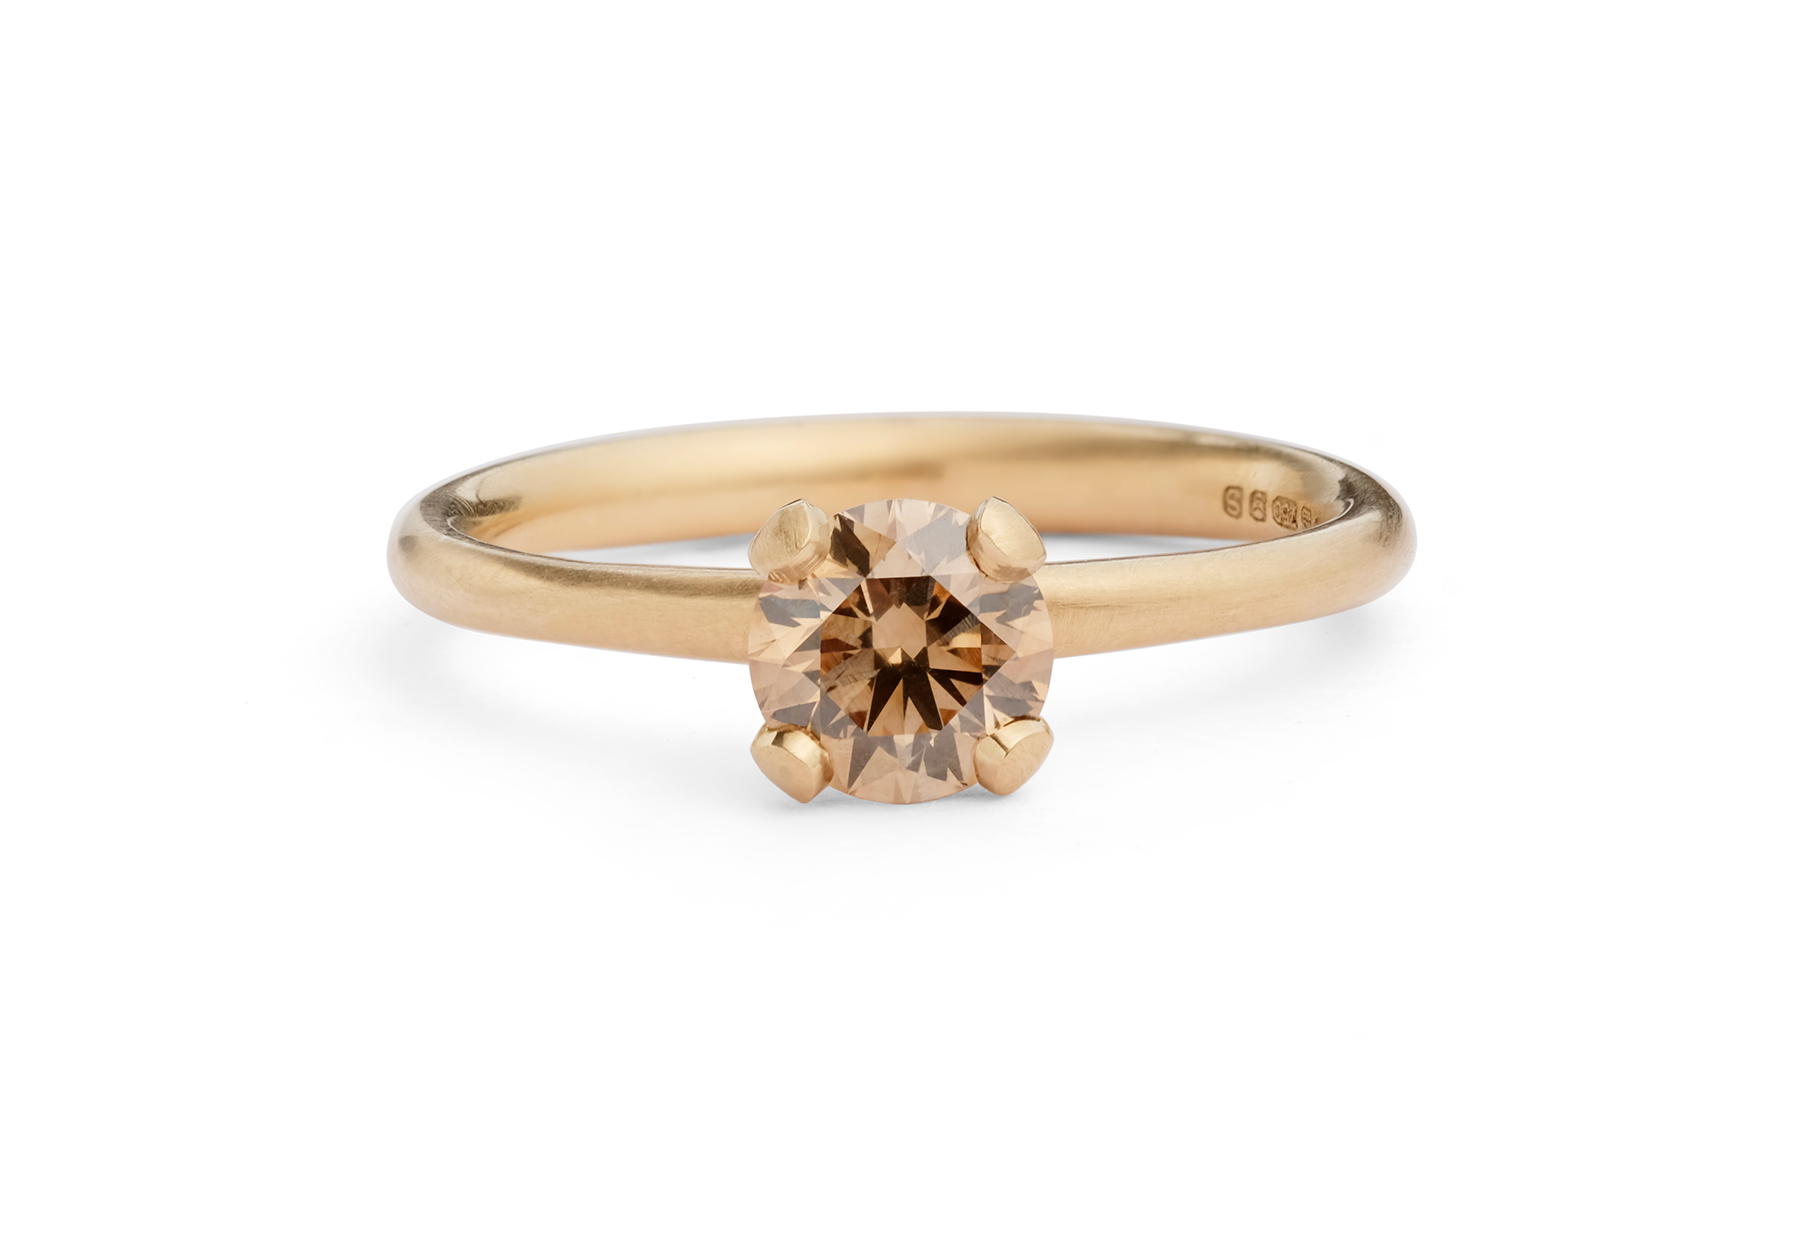 Modern rose gold and cognac diamond 4-claw engagement ring